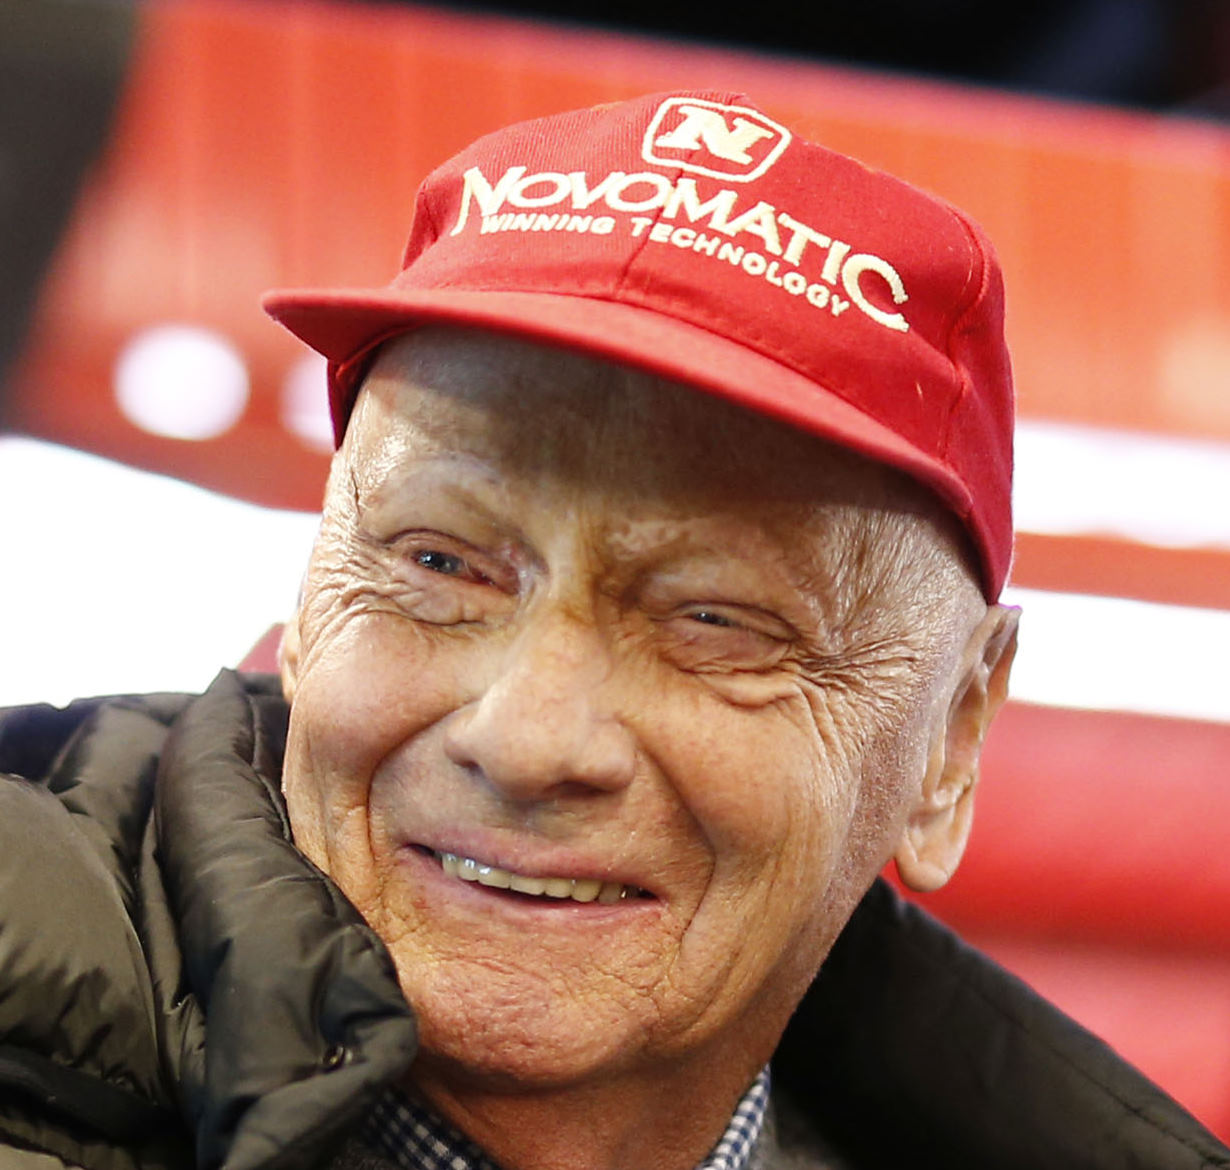 Now how would Mercedes' Lauda know what Renault is going to do?